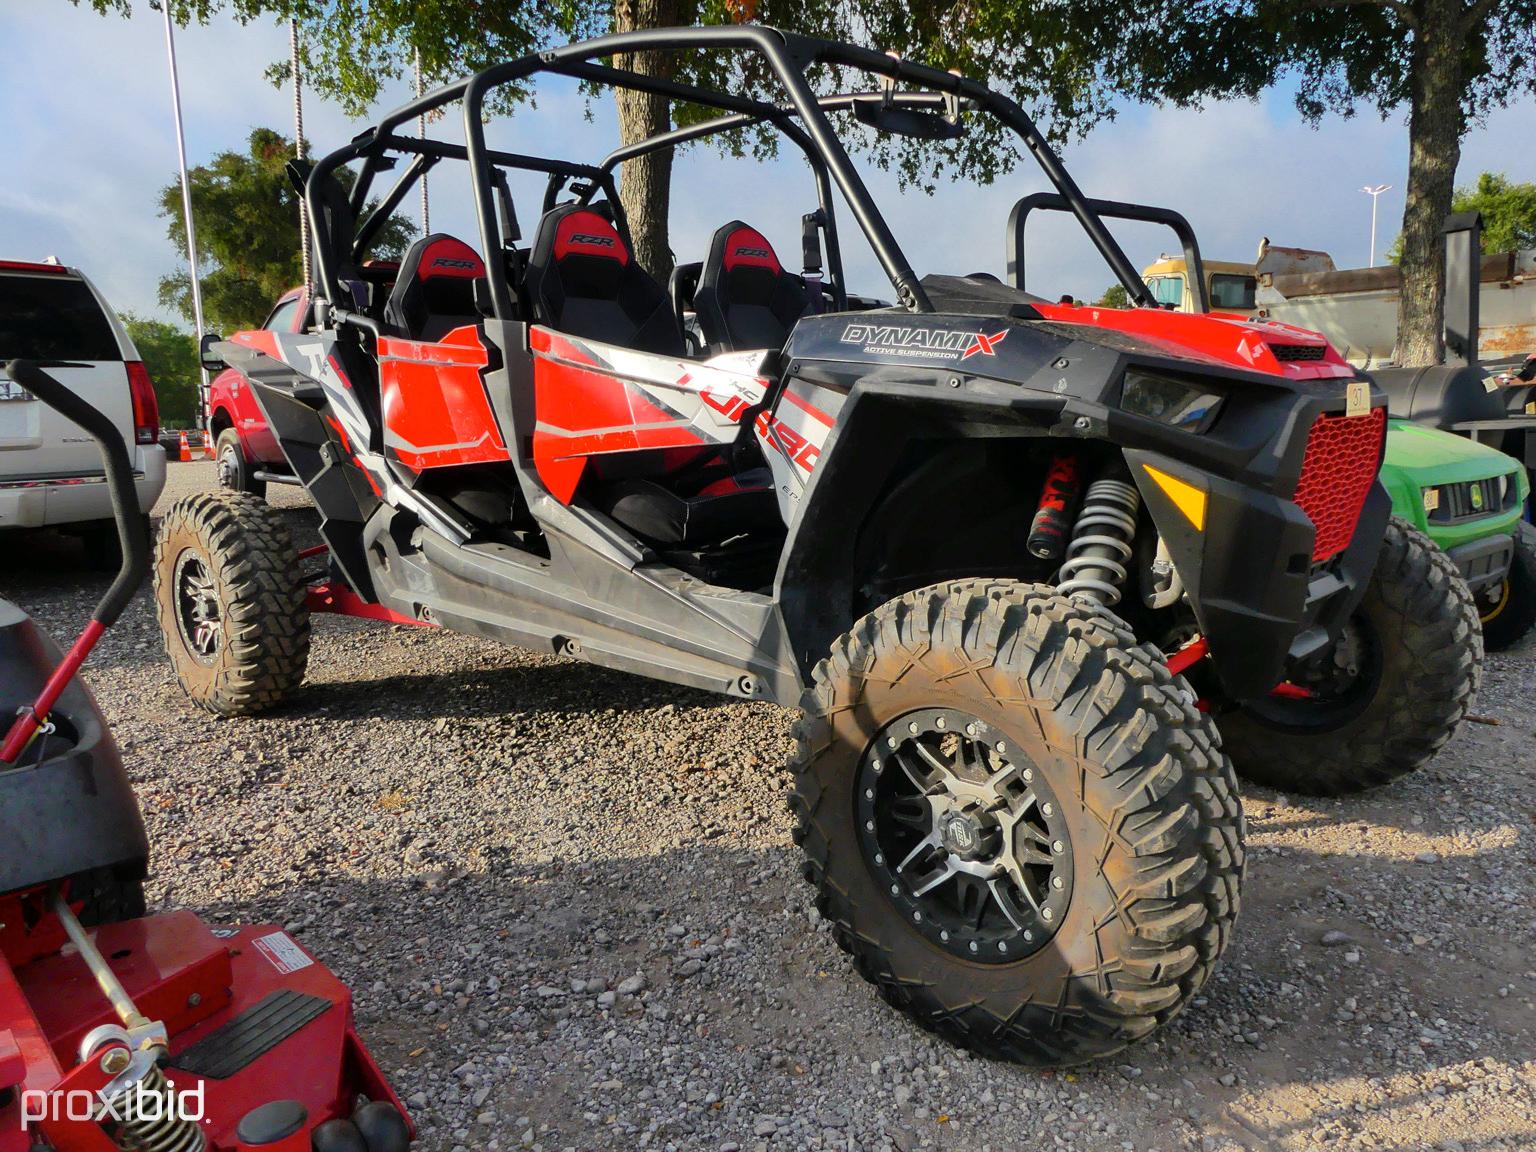 2018 POLARIS RAZOR (VIN # 3NSVFL929JF232088) (SHOWING APPX 307 HOURS, 2,185 MILES) (TITLE ON HAND AN